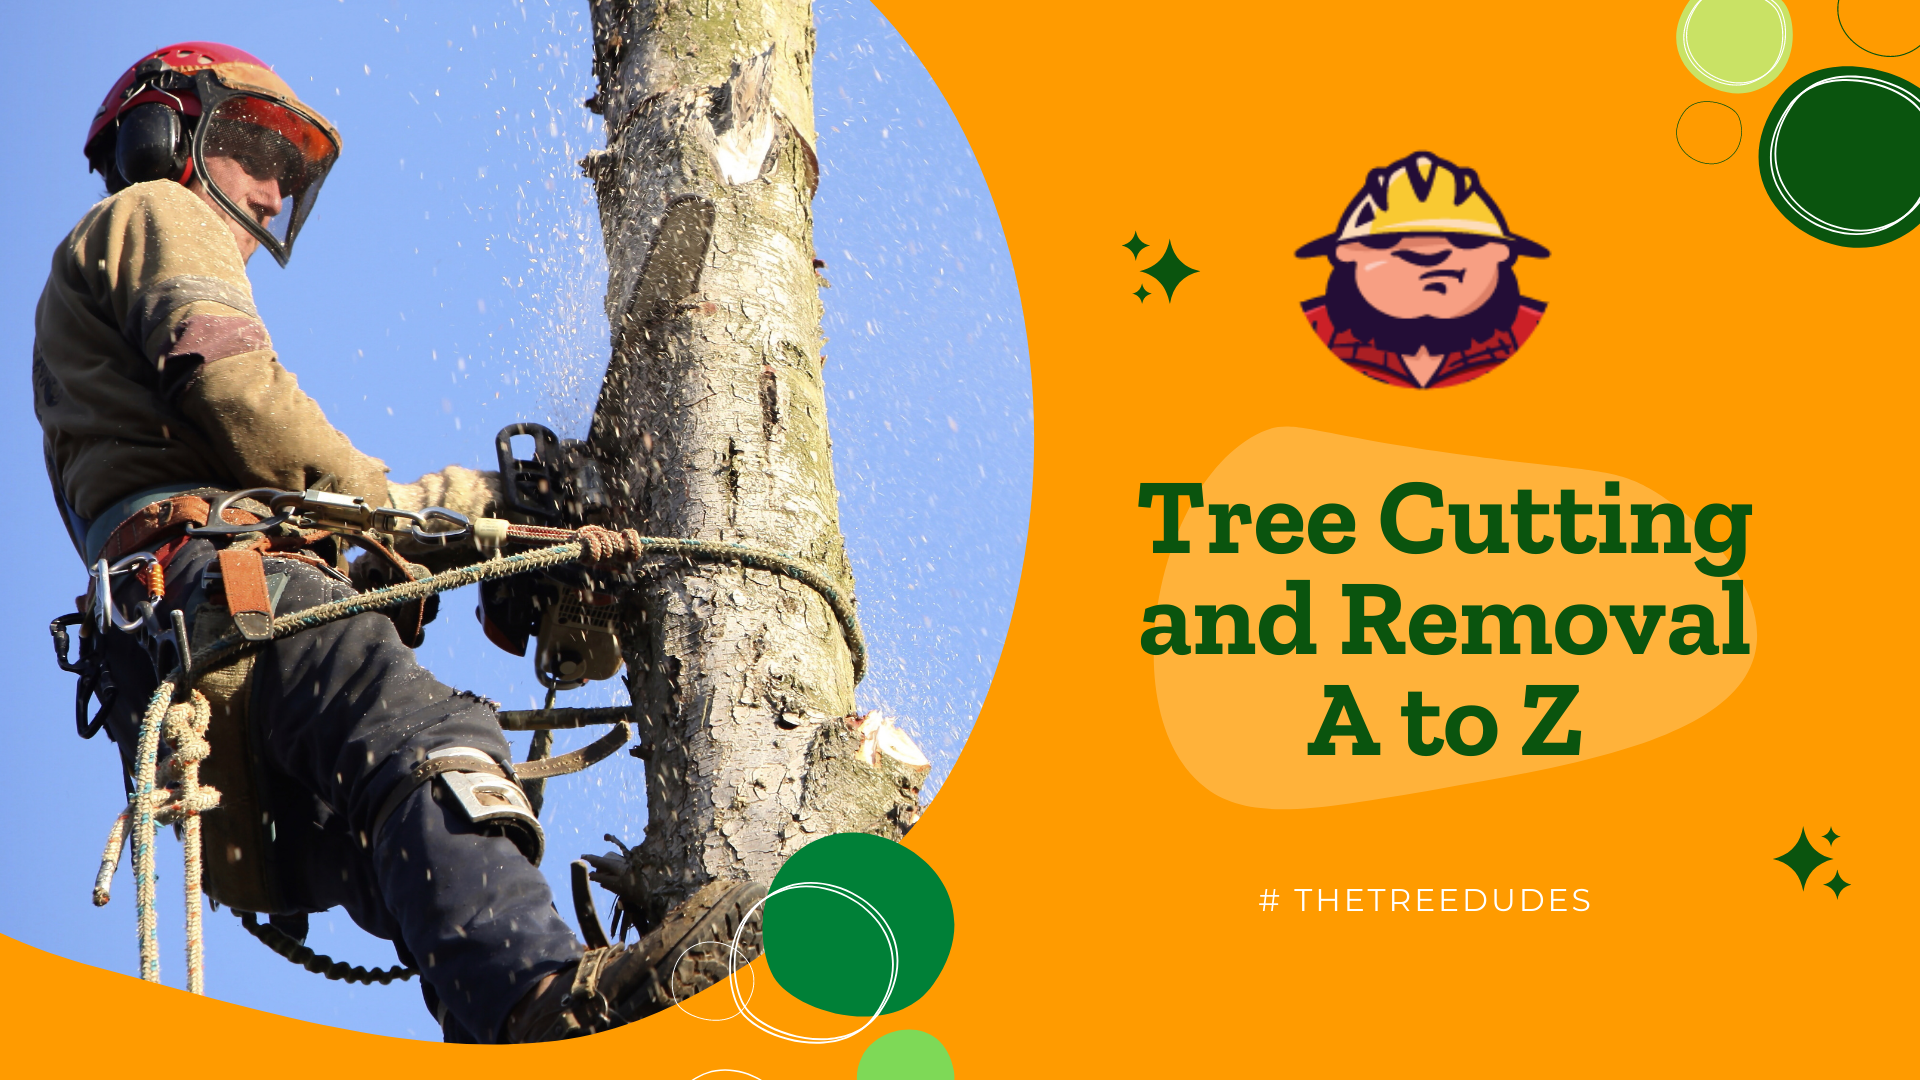 Tree Cutting and Removal A to Z